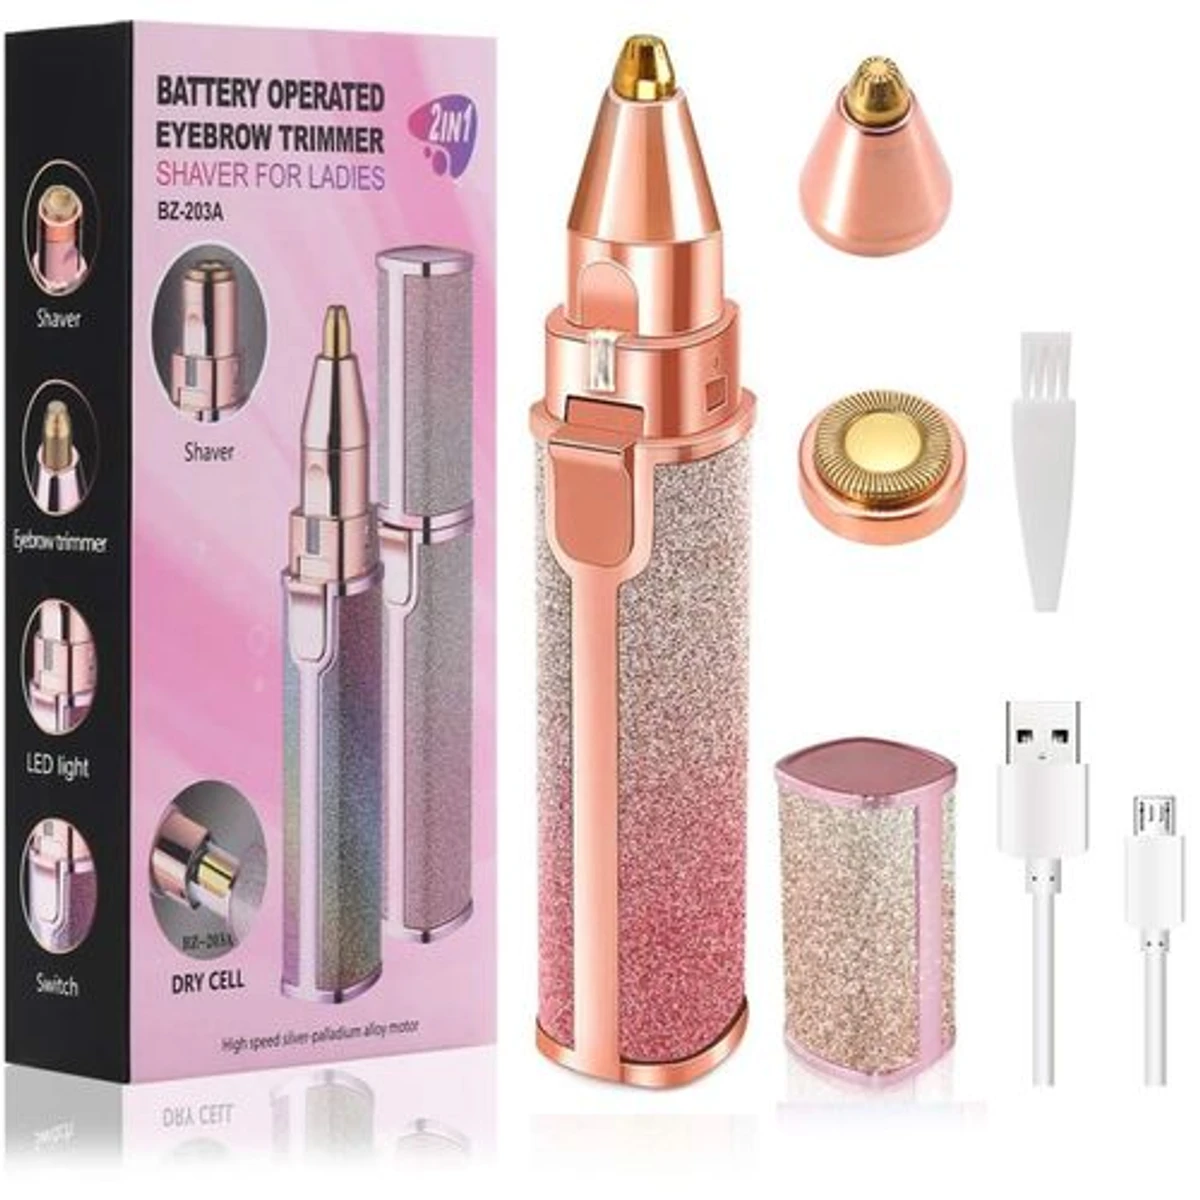 2-in-1 Lady Shaver Flawless Eyebrow Trimmer